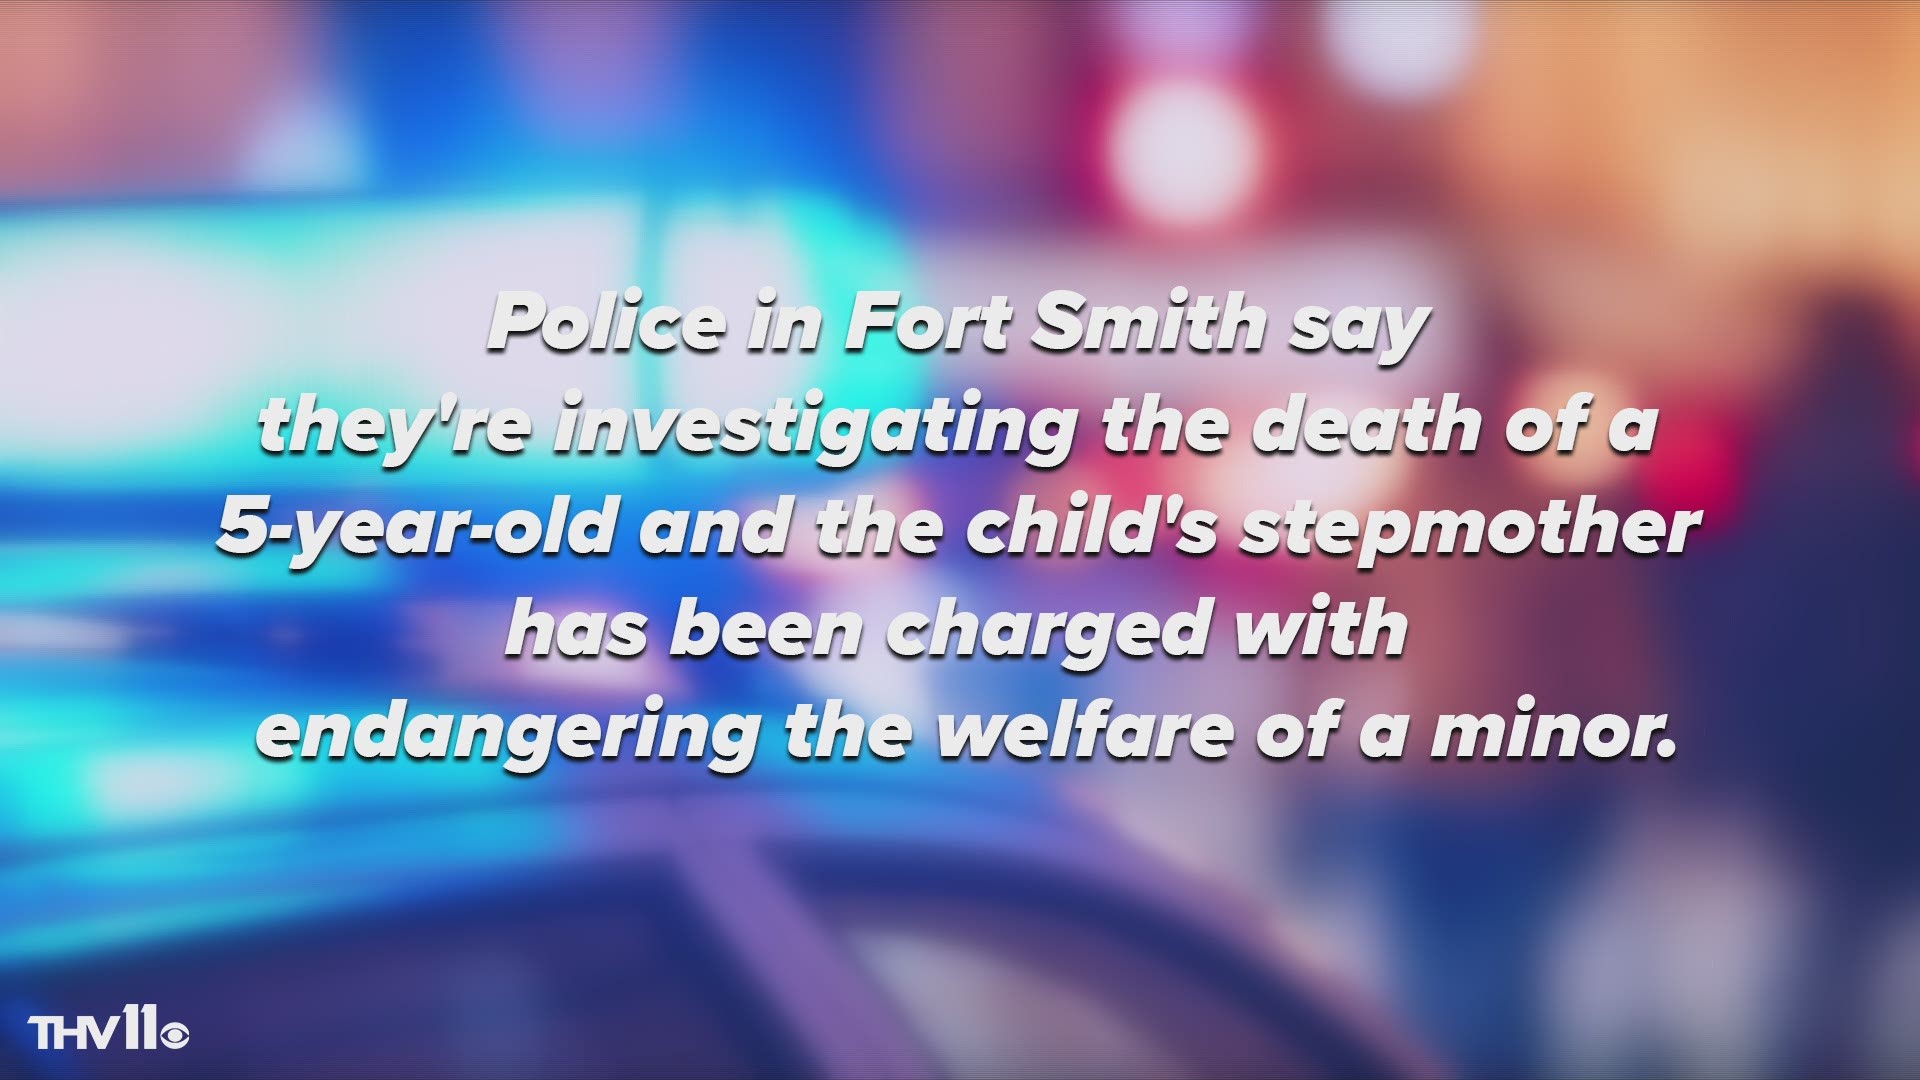 Fort Smith police investigate death of 5-year-old